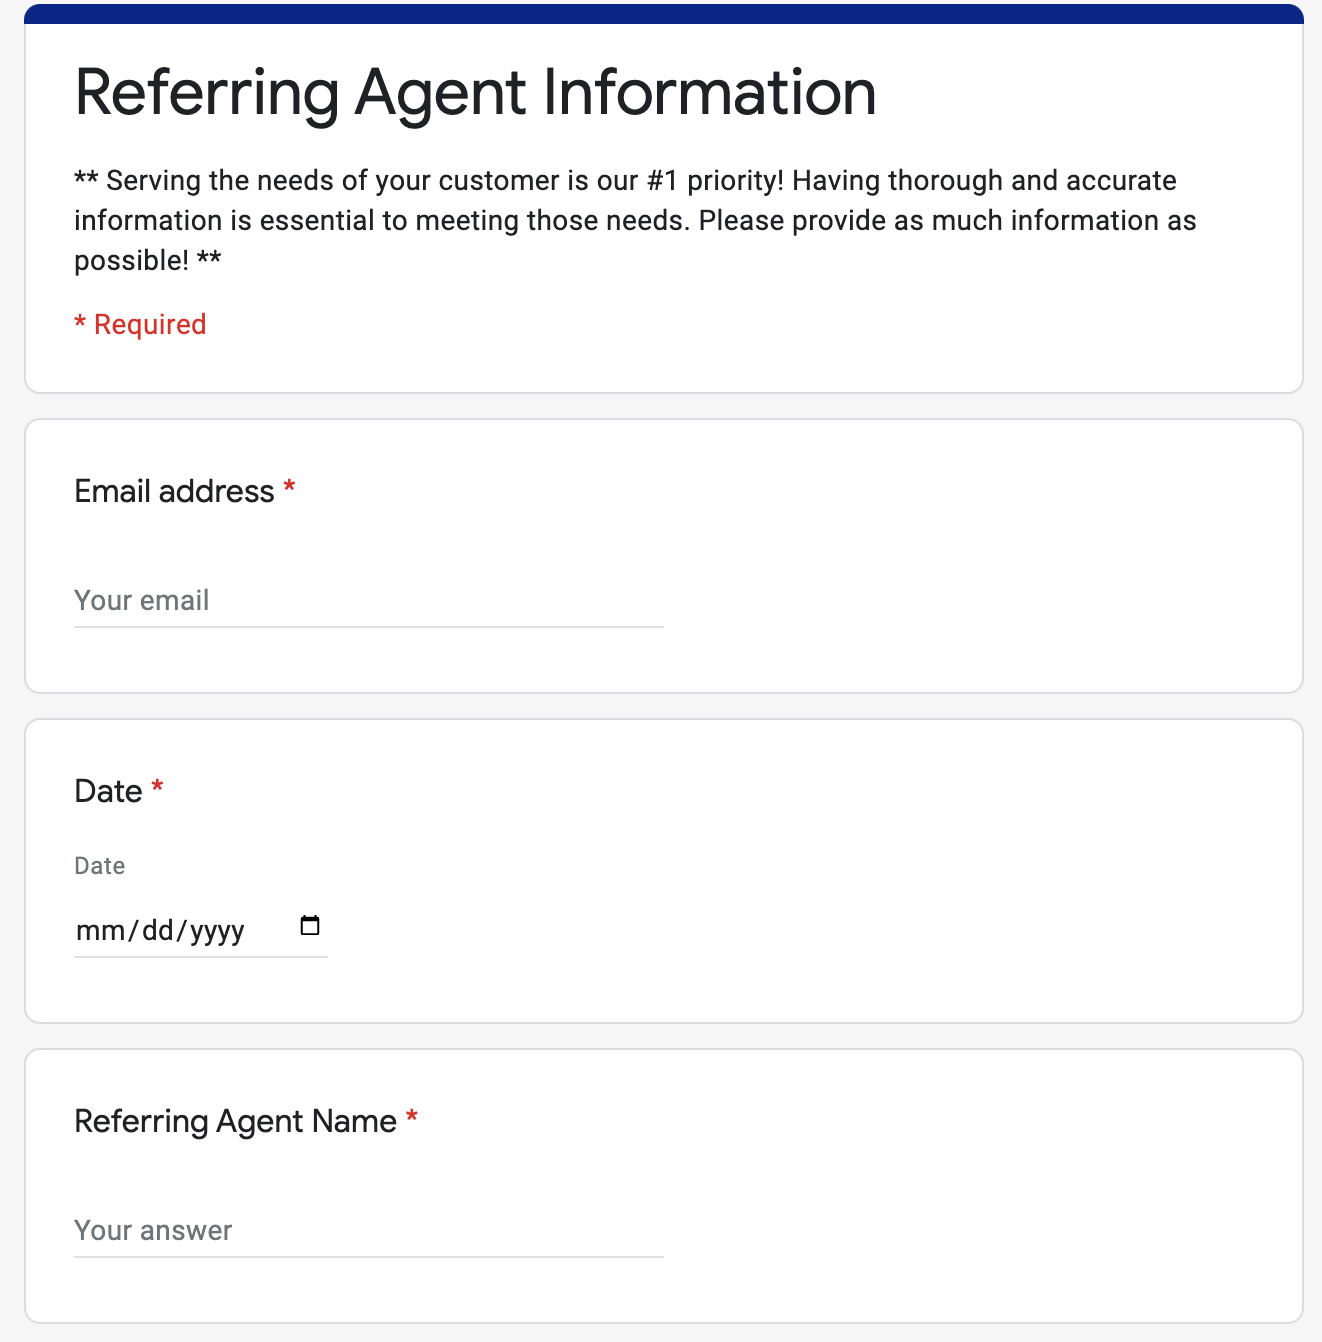 Outgoing Referral Form GOOGLE FORM